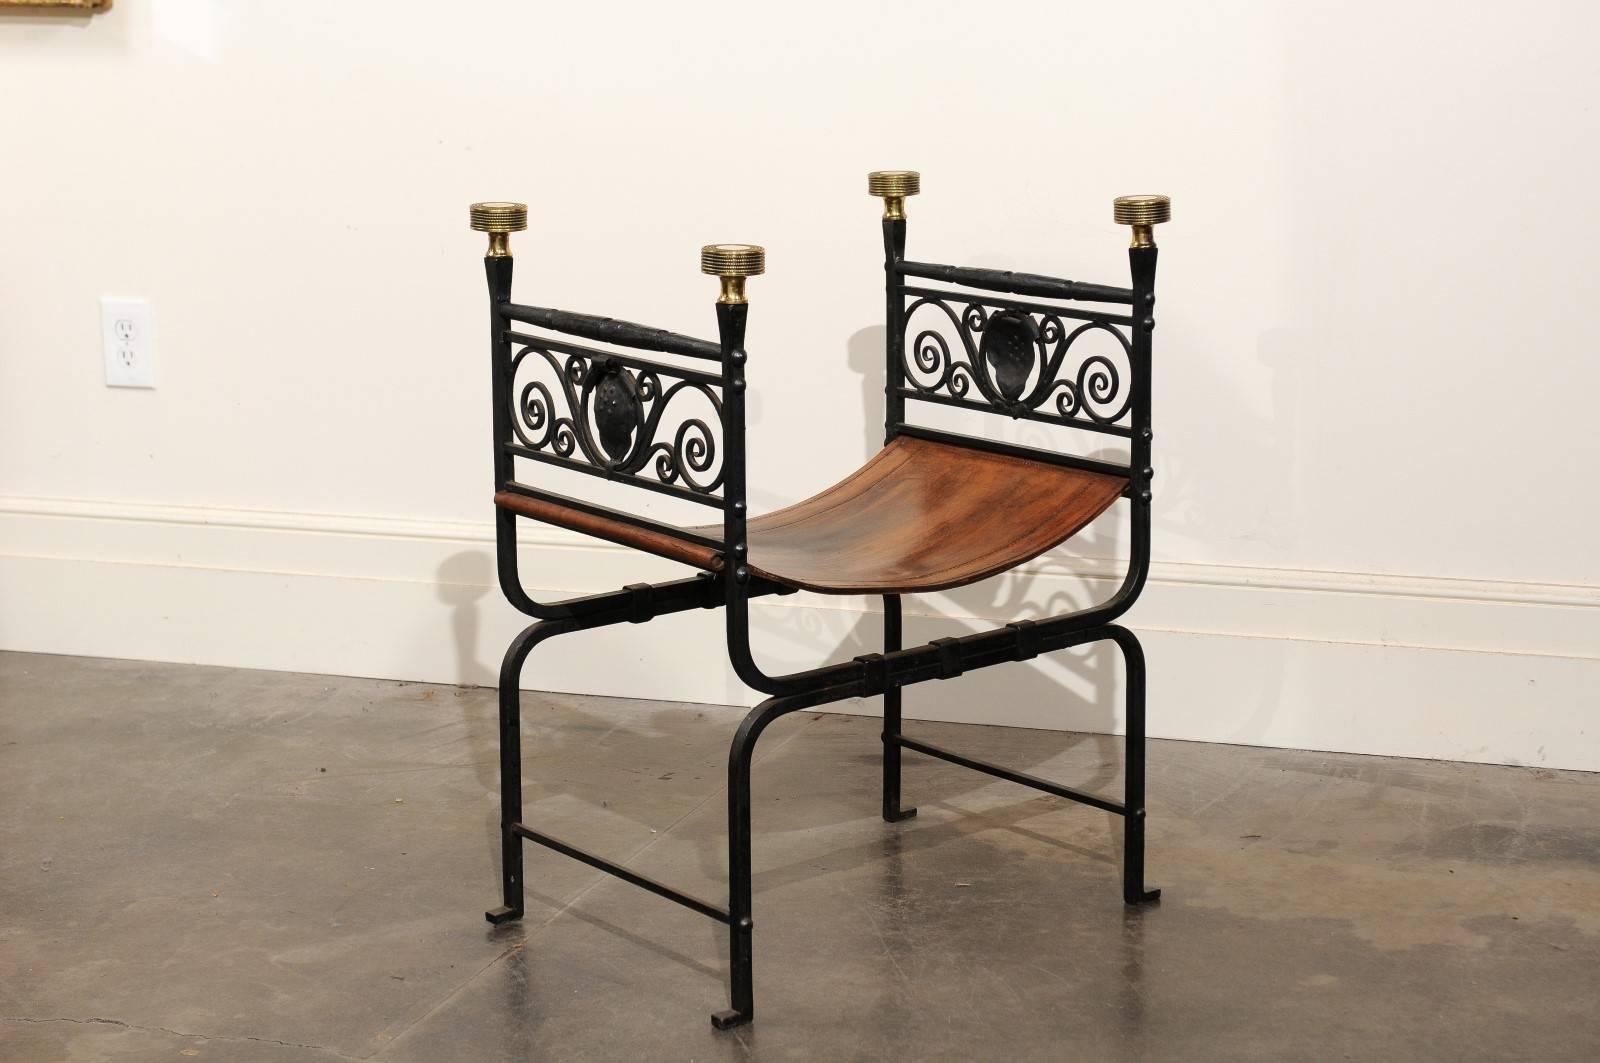 This stylish English Campaign stool from the turn of the century features an H shaped frame securing a brown leather seat. The eye is immediately drawn to the exquisite black iron frame, adorned on the sides with a delicate décor of volutes flanking